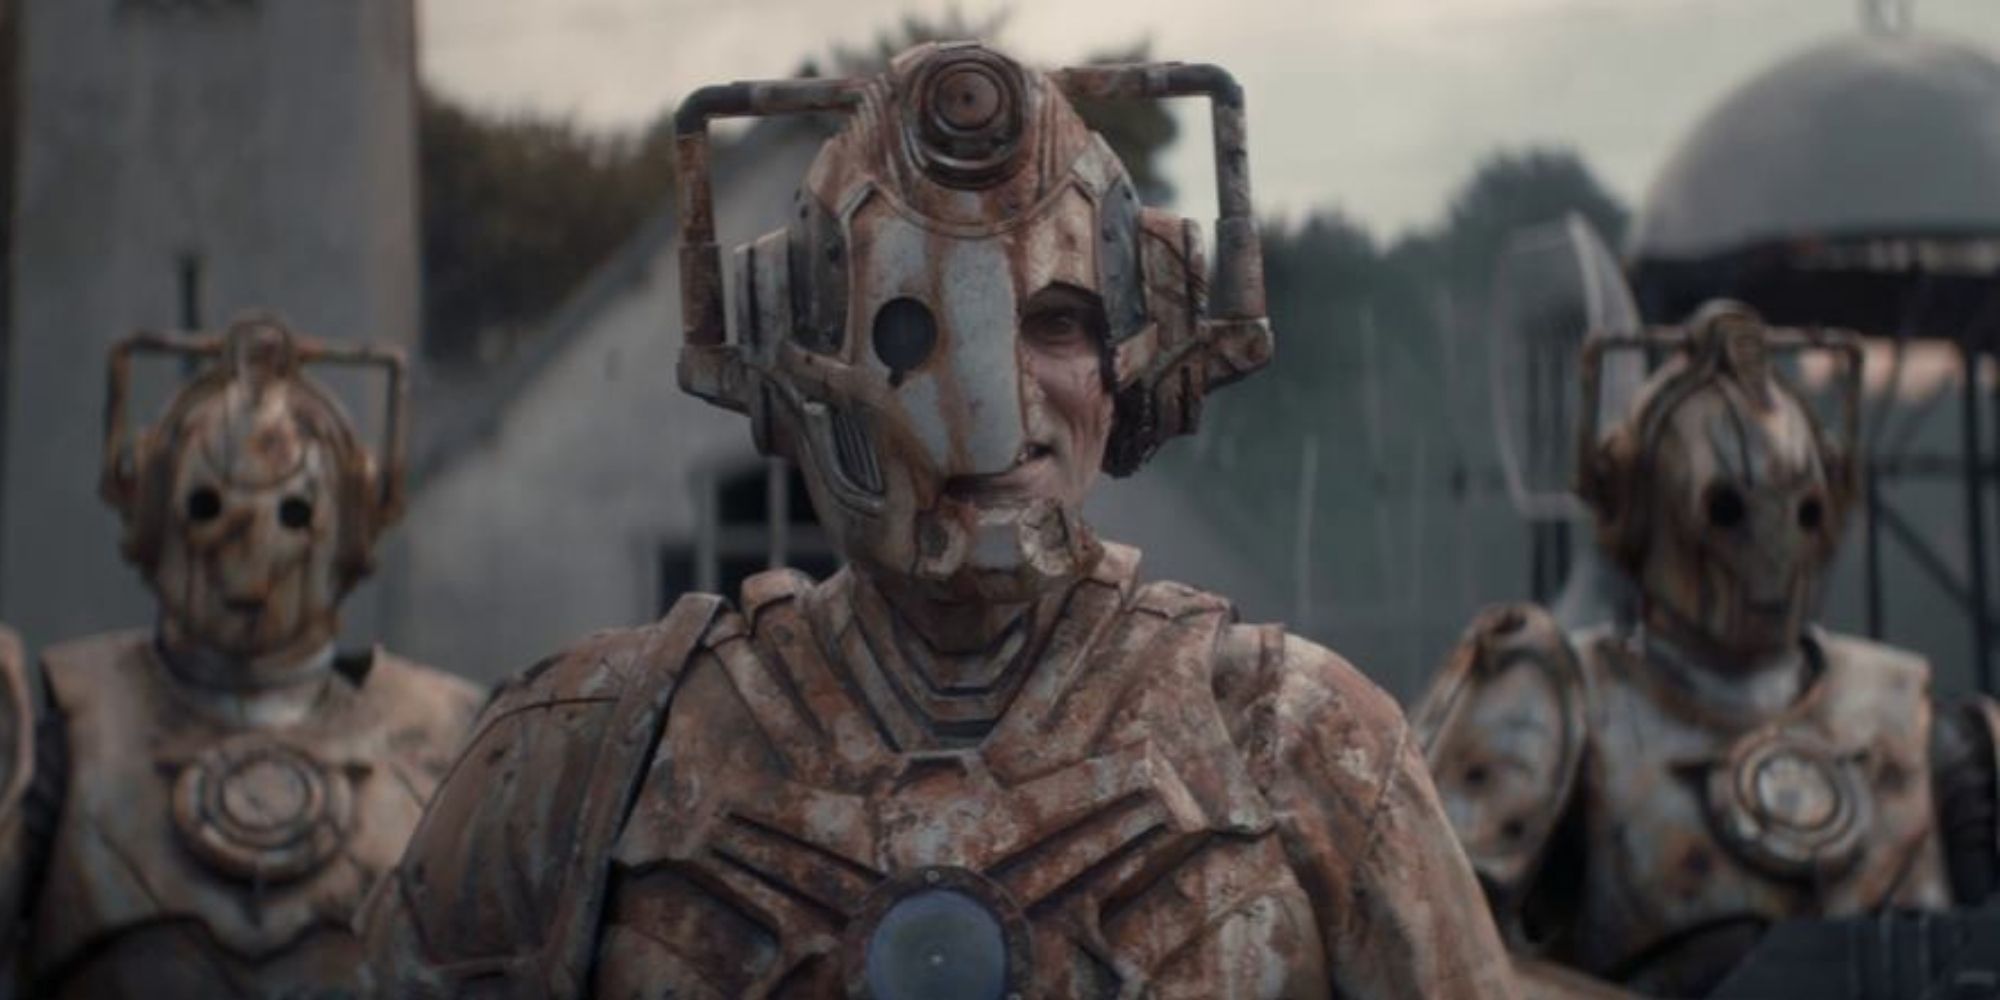 Official image of Ascension of the Cybermen, an episode from the TV show Doctor Who.